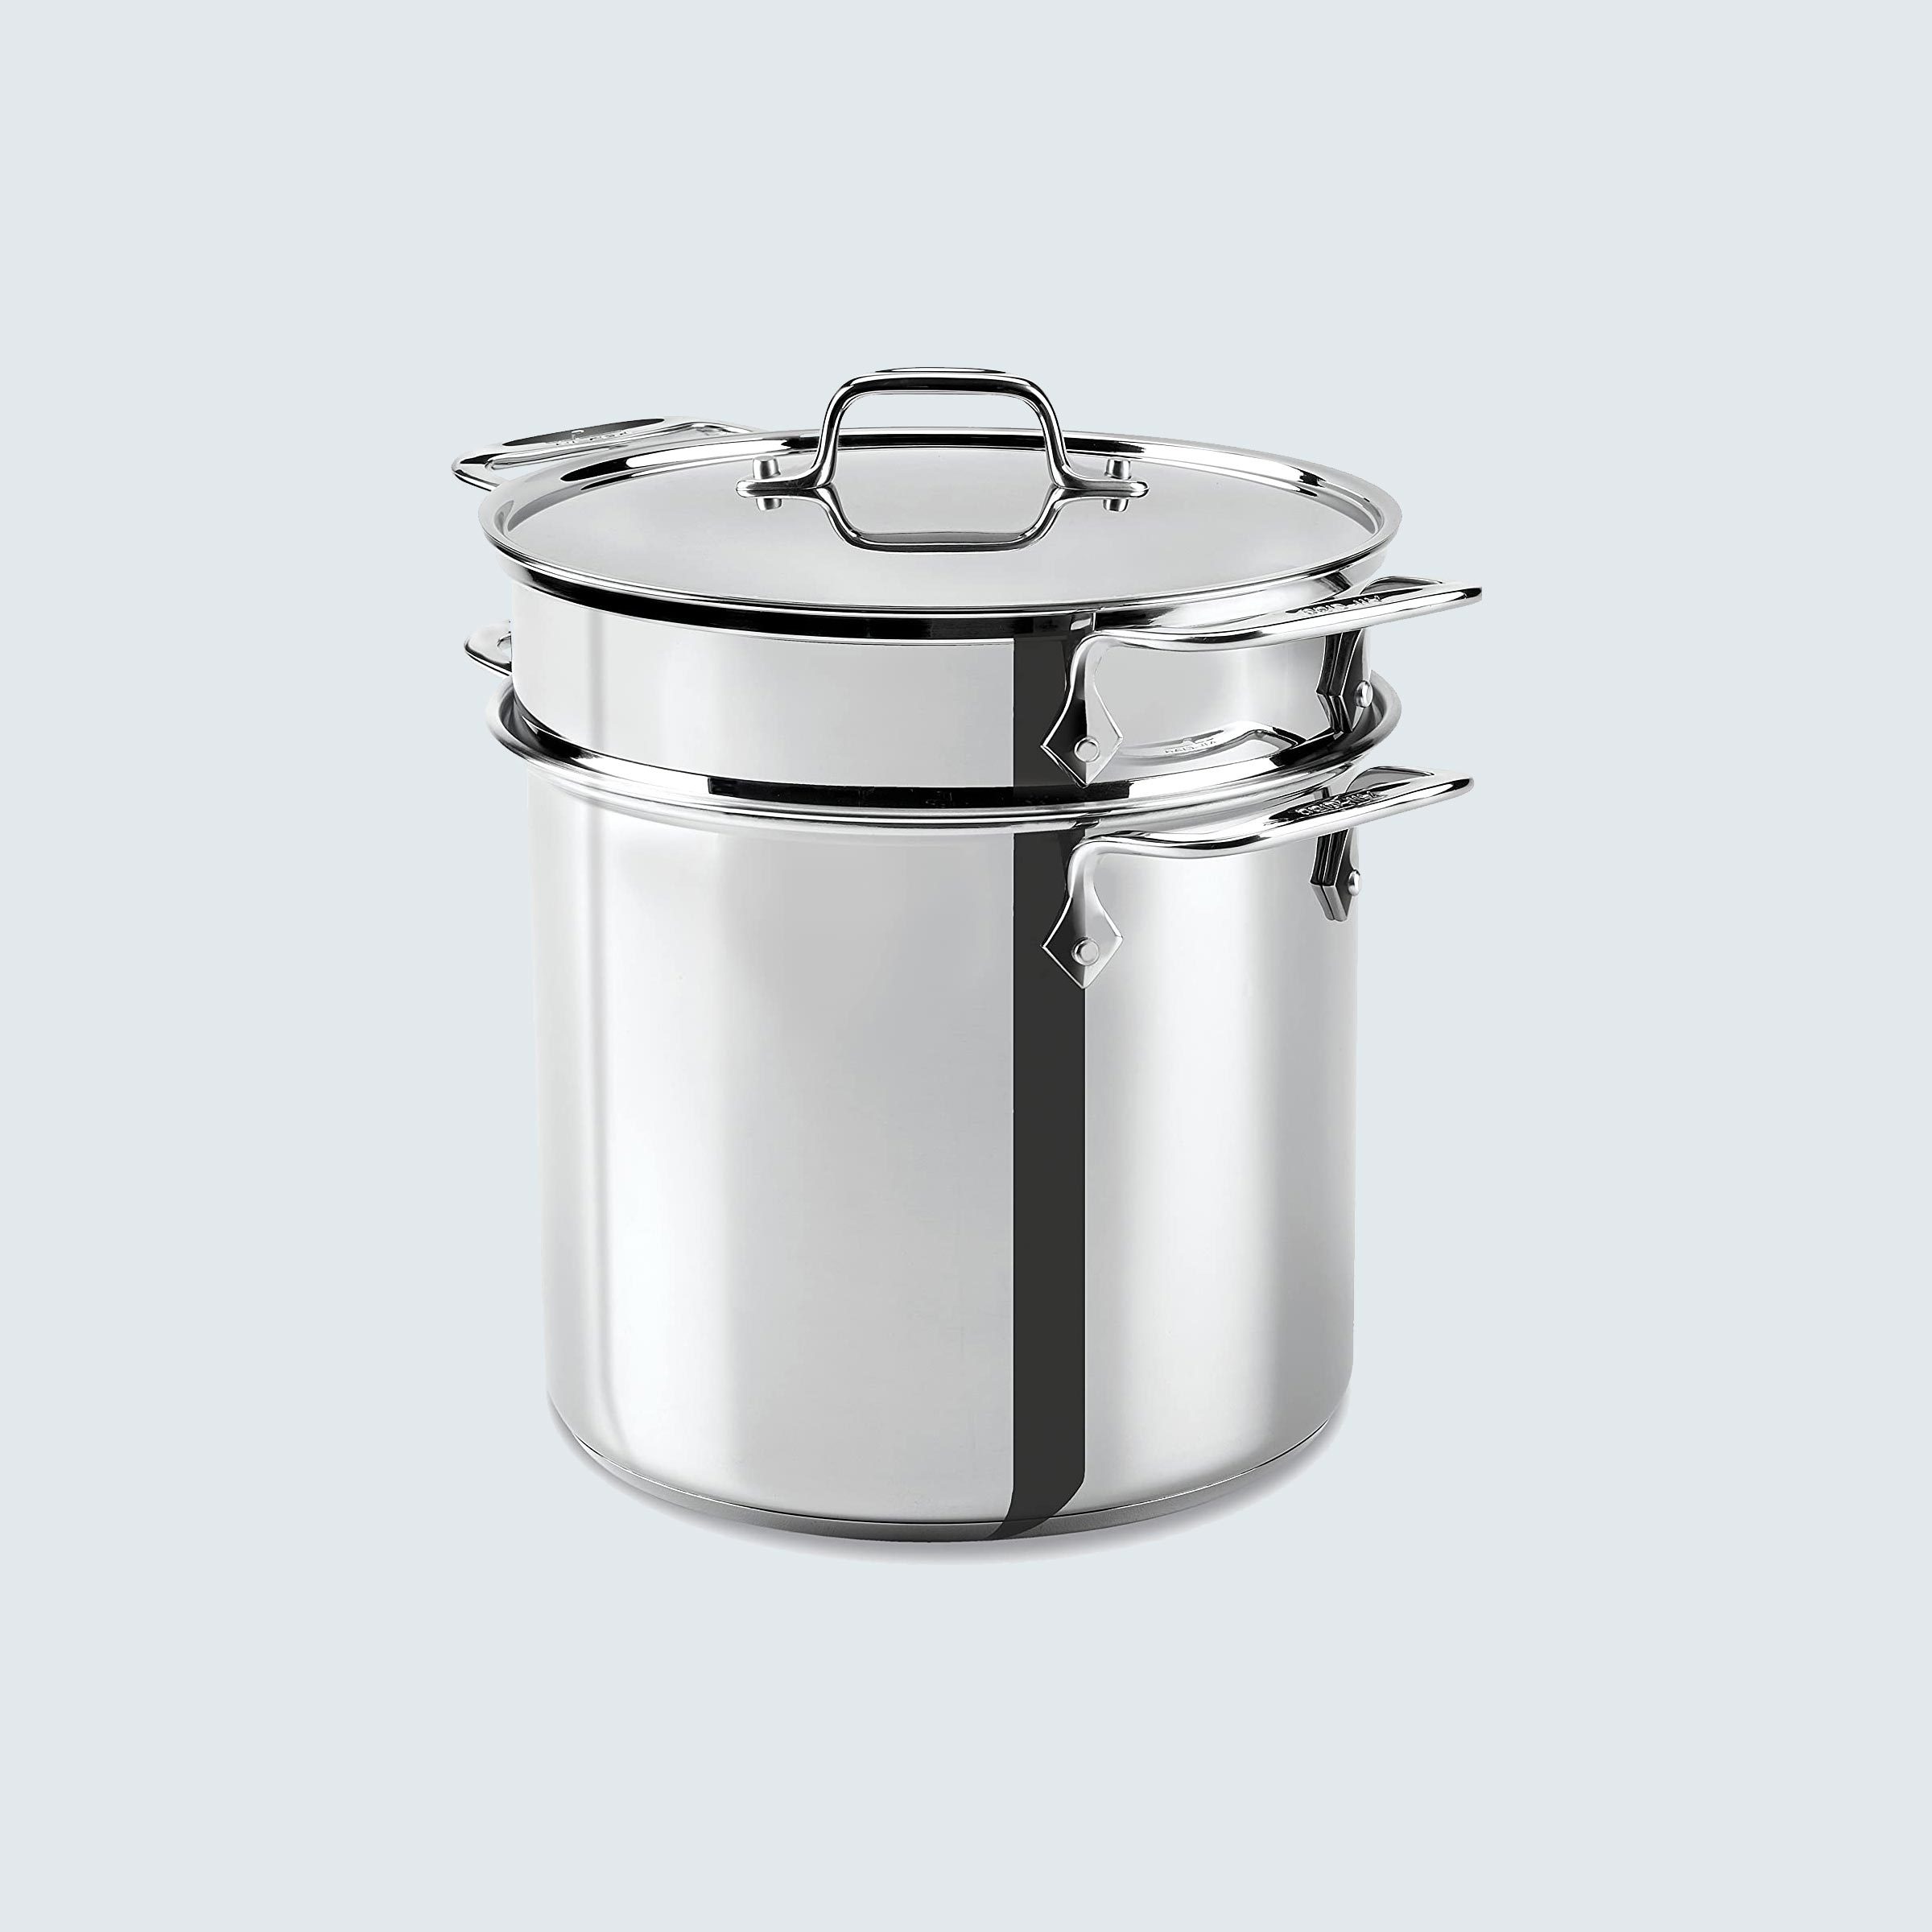 All-Clad cookware